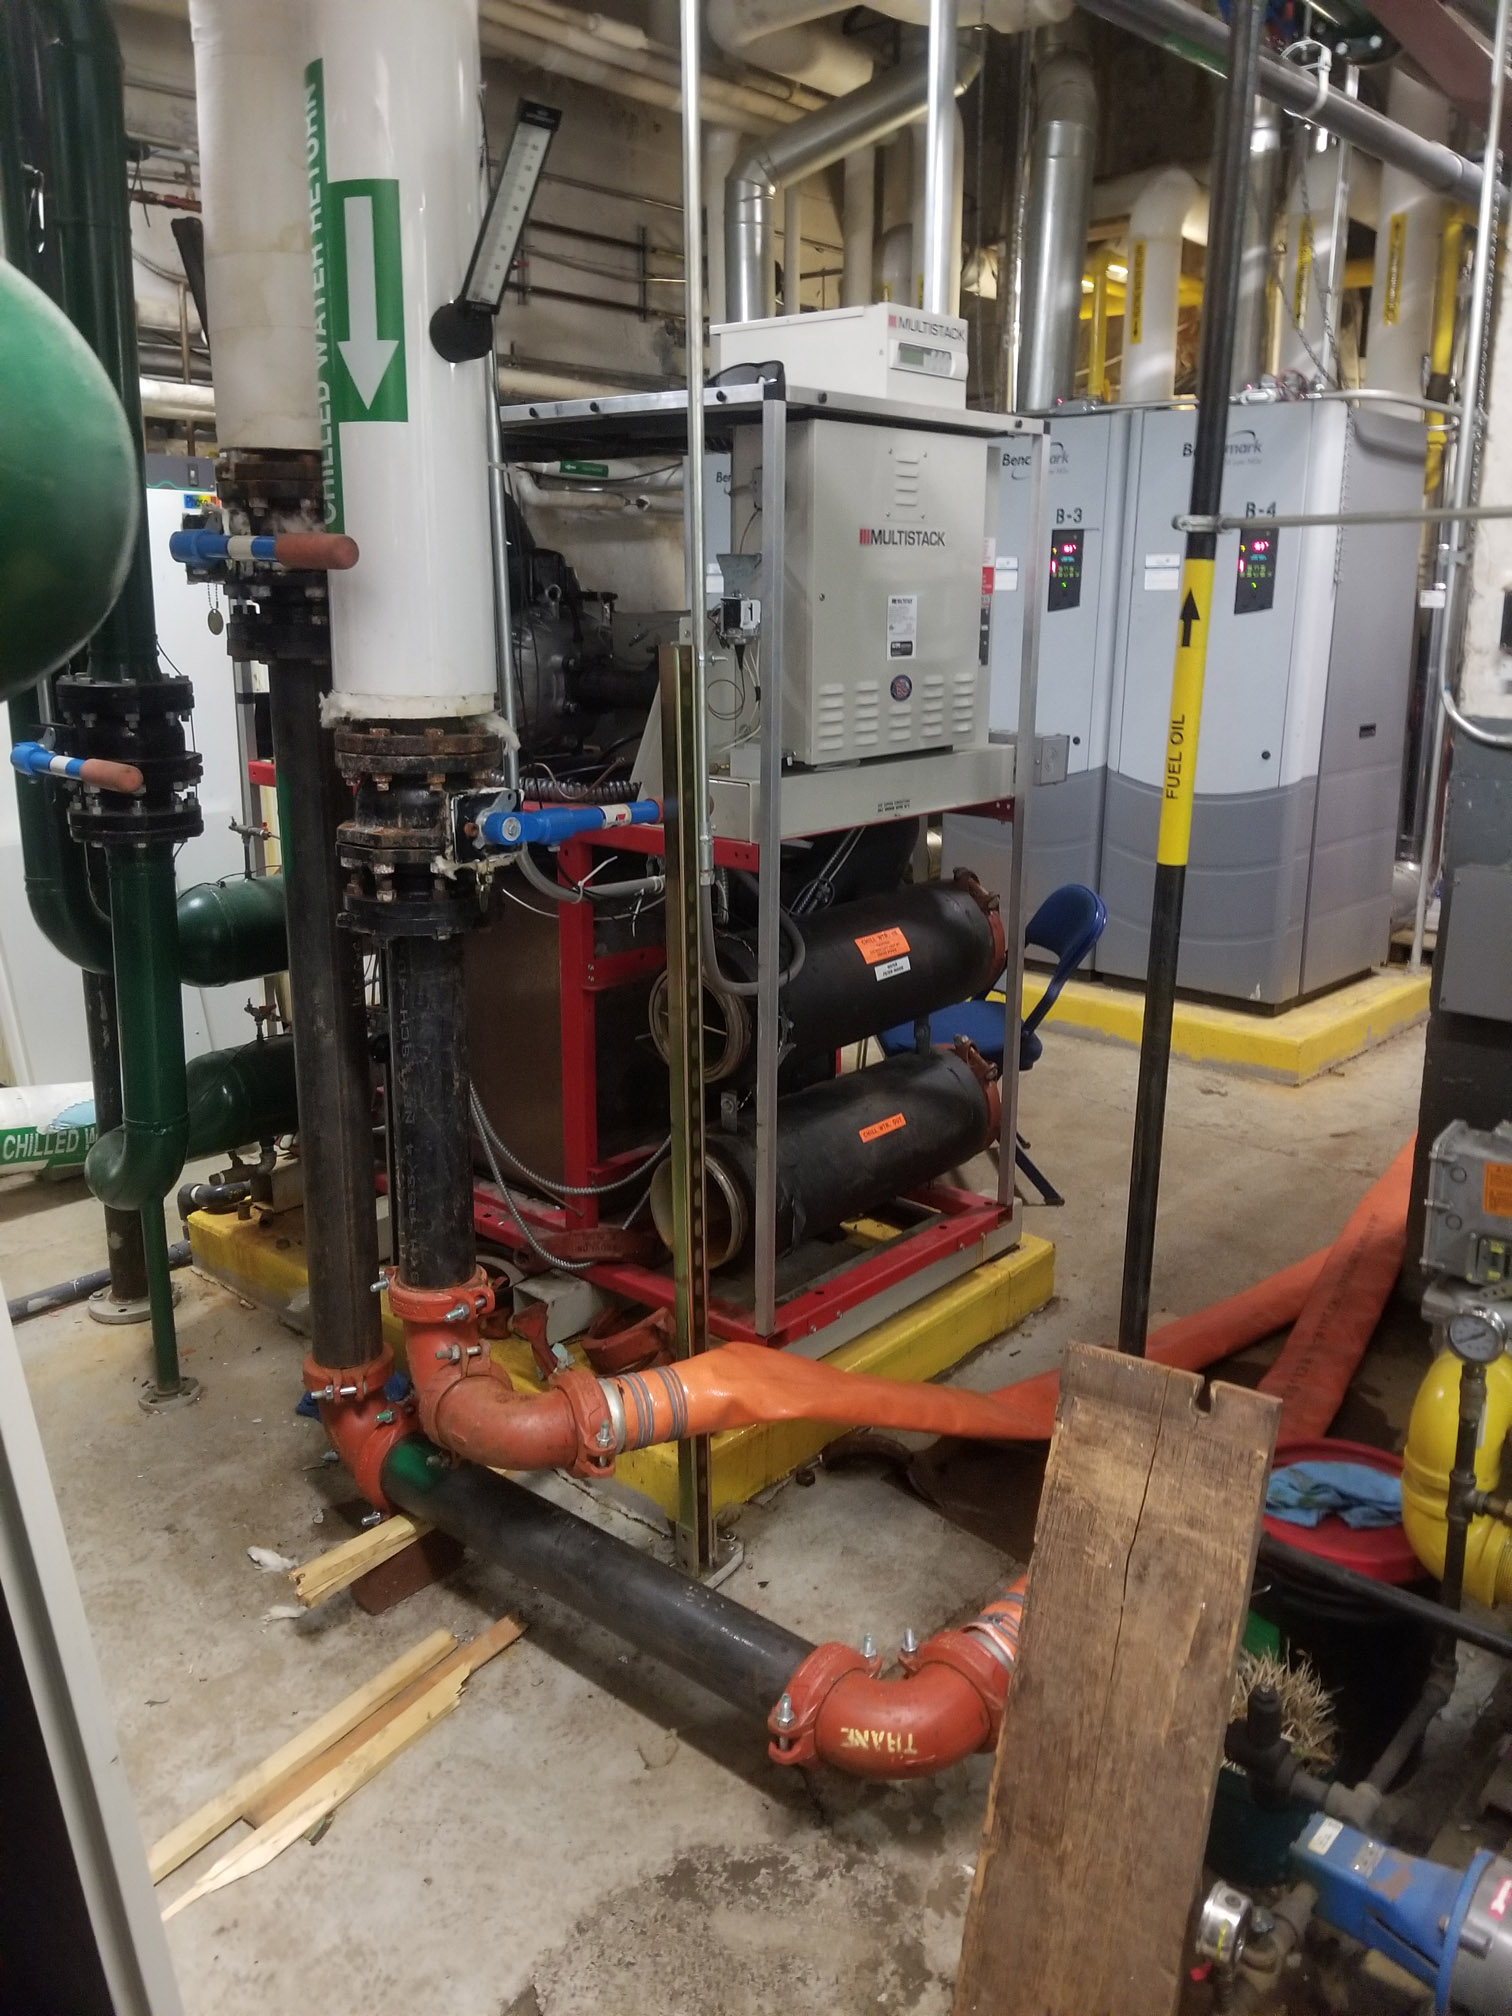 Air Cooled Chiller Rental St. Johns County FL, Chiller AC Rental St. Johns County FL, Temporary Chiller St. Johns County FL, Rental Chiller Installation St. Johns County FL